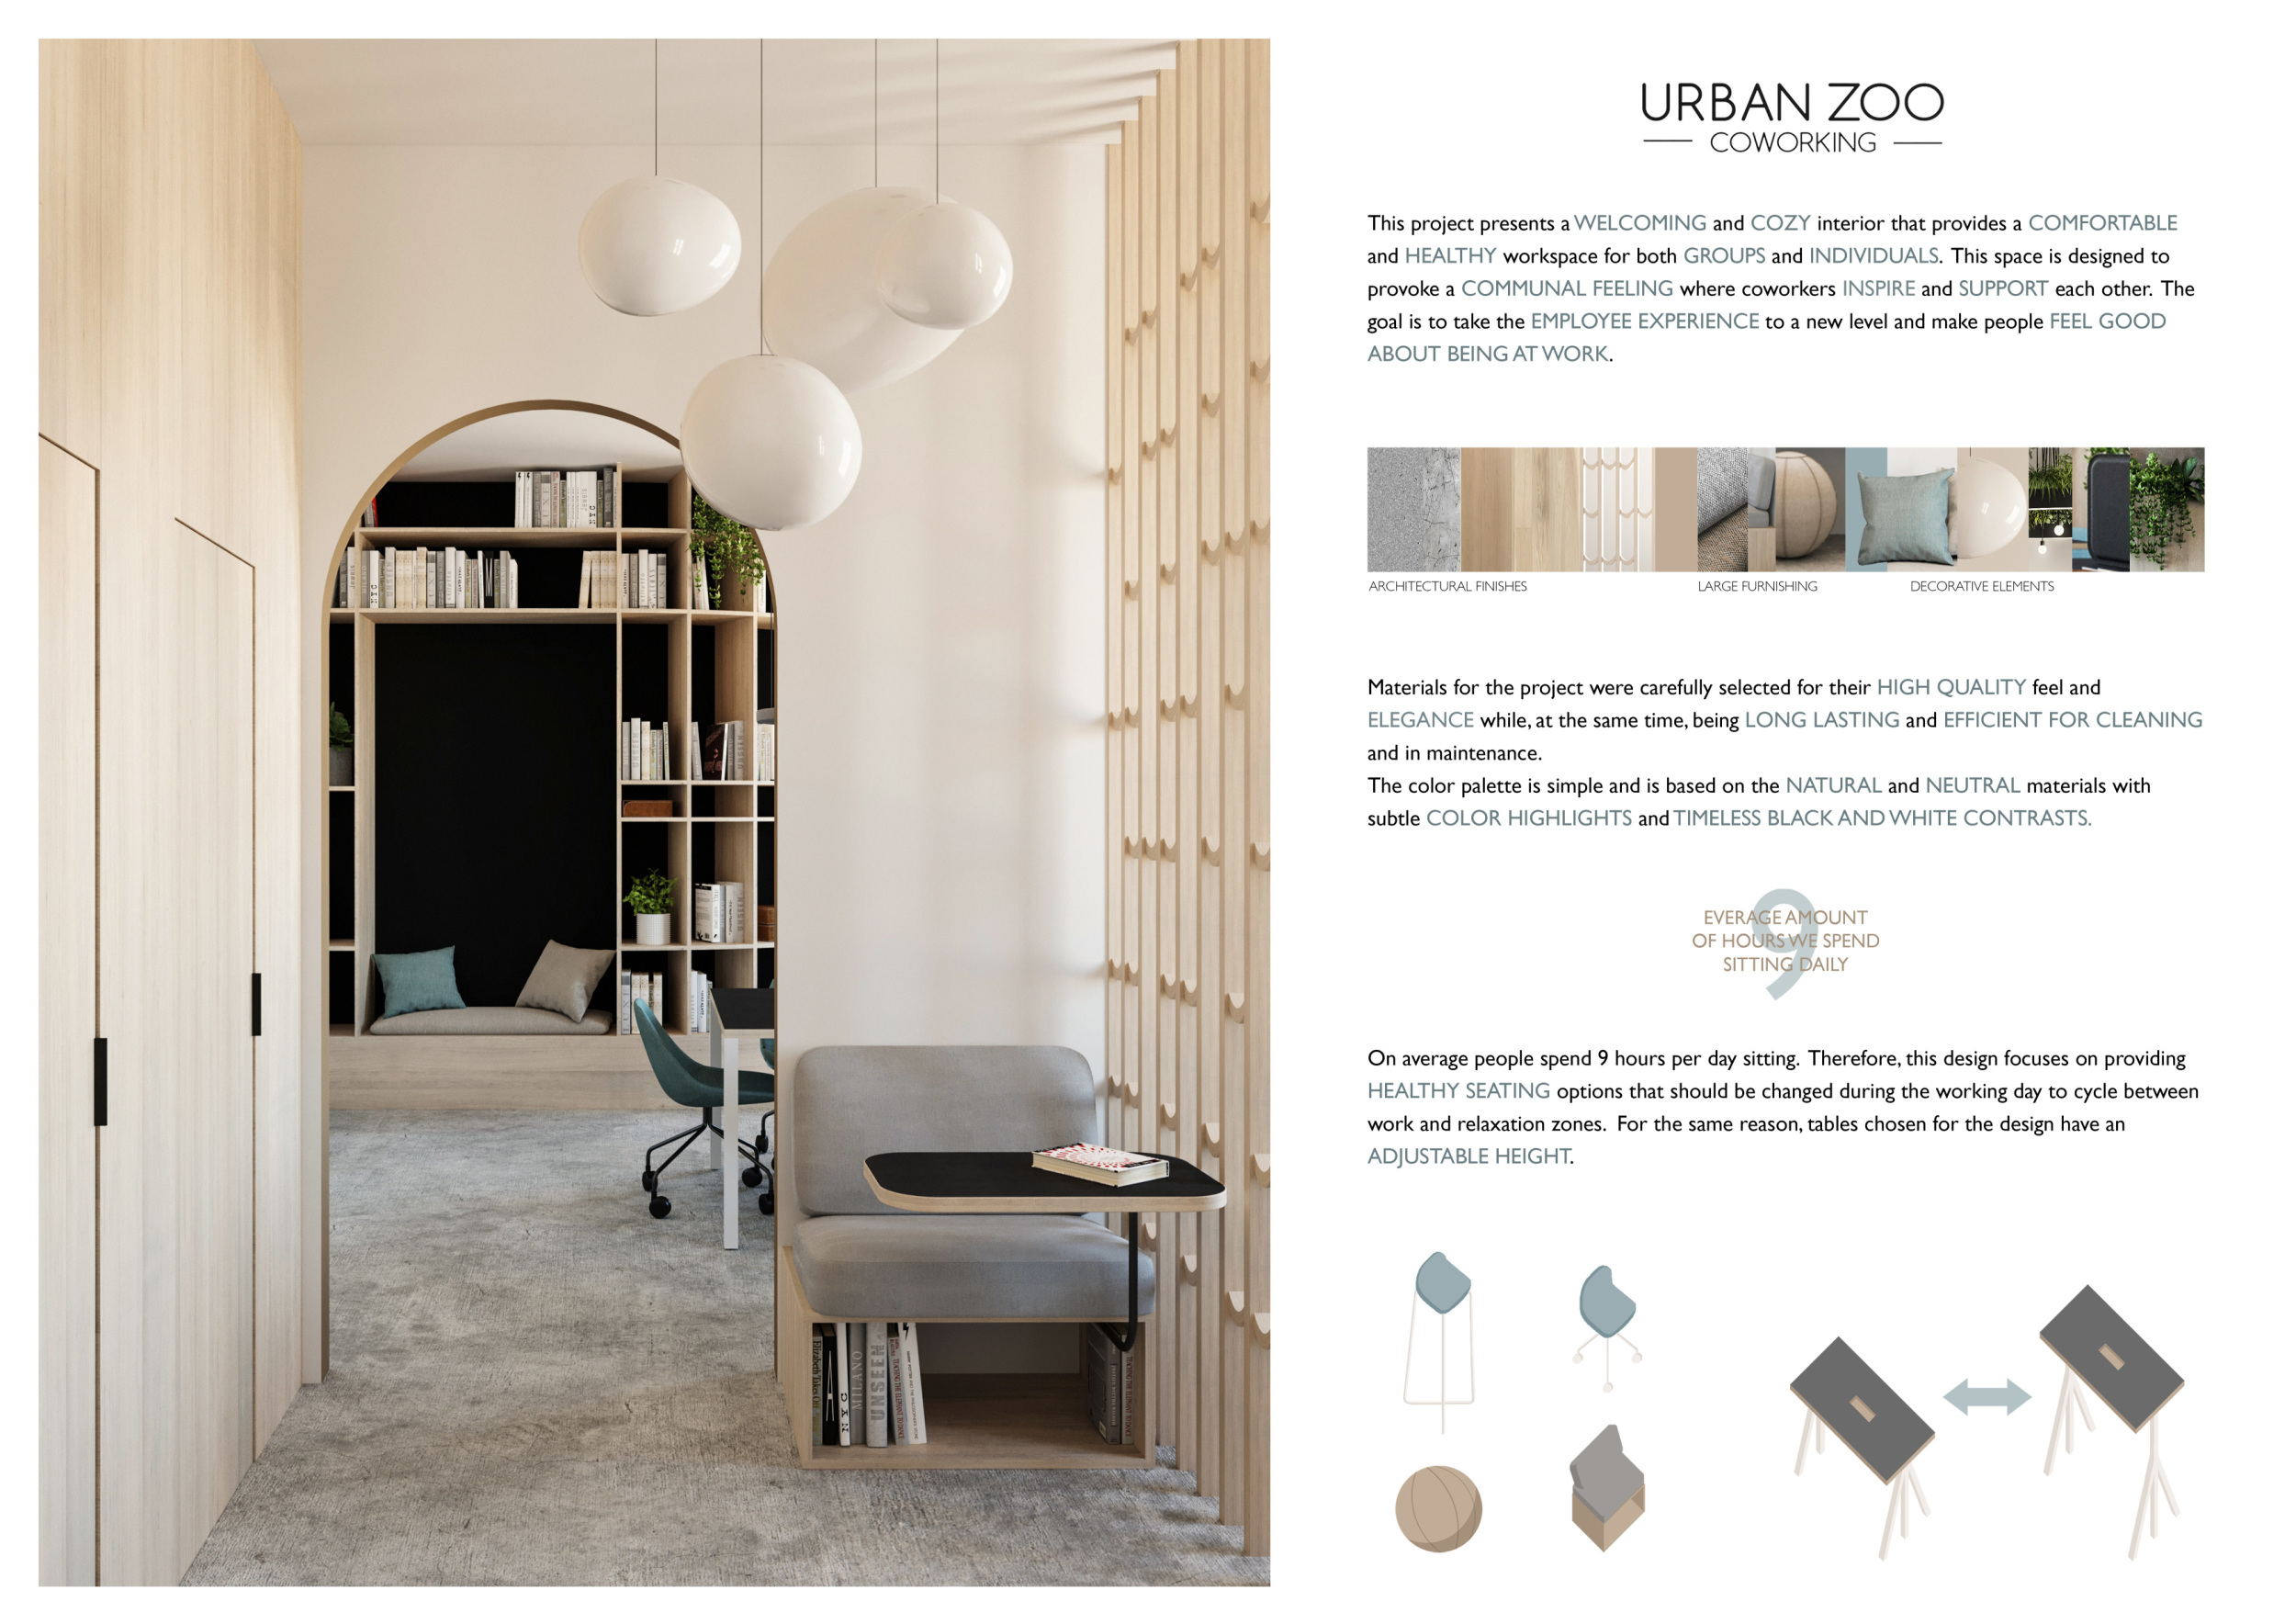 Urban Zoo Coworking Design Challenge Competition Winners